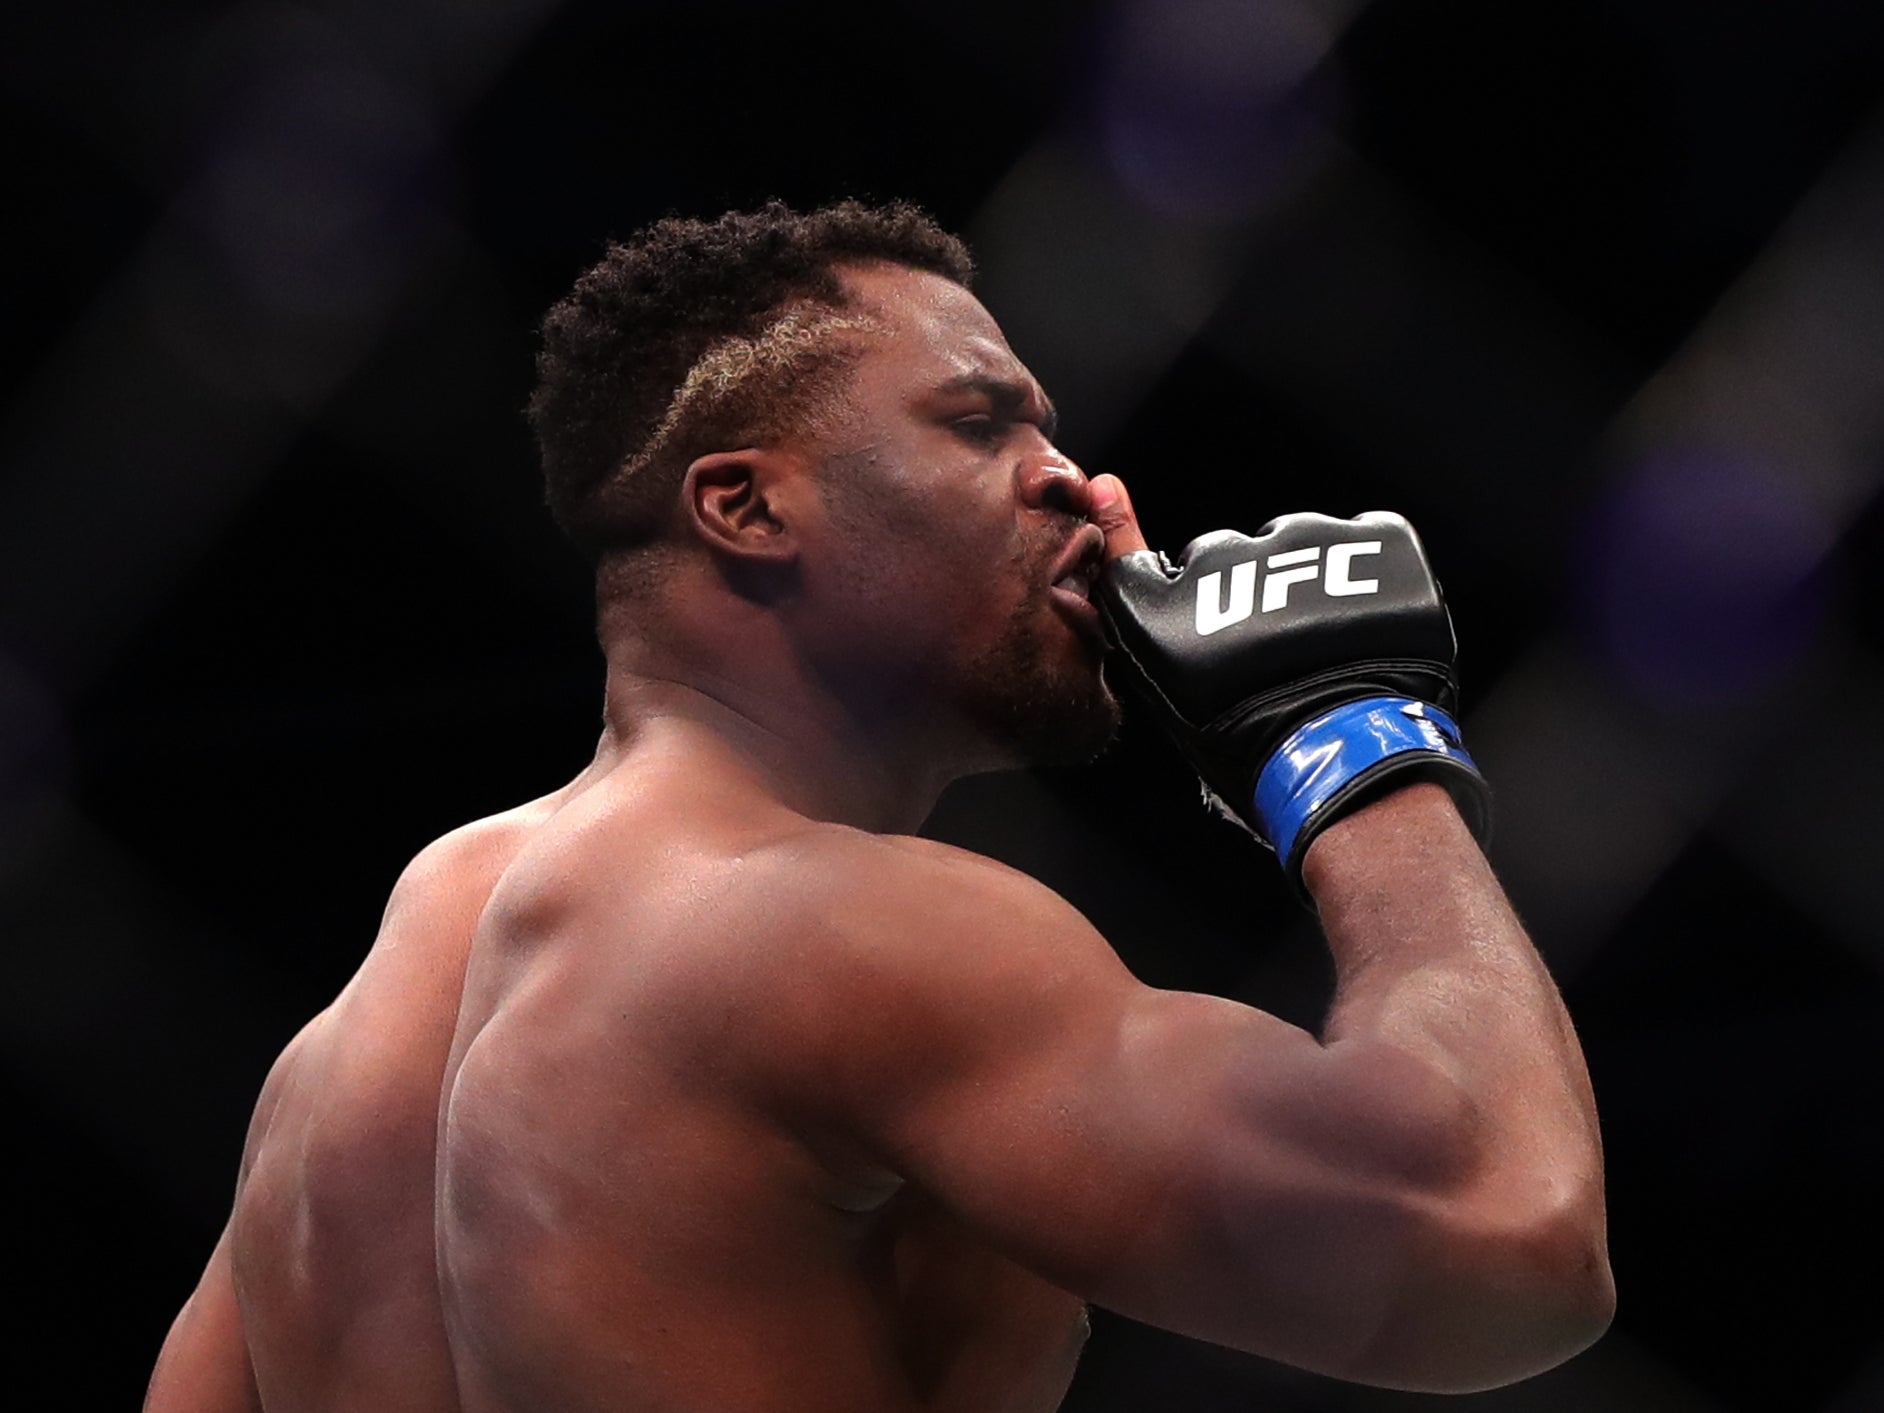 UFC heavyweight champion Francis Ngannou, a former teammate of Gane